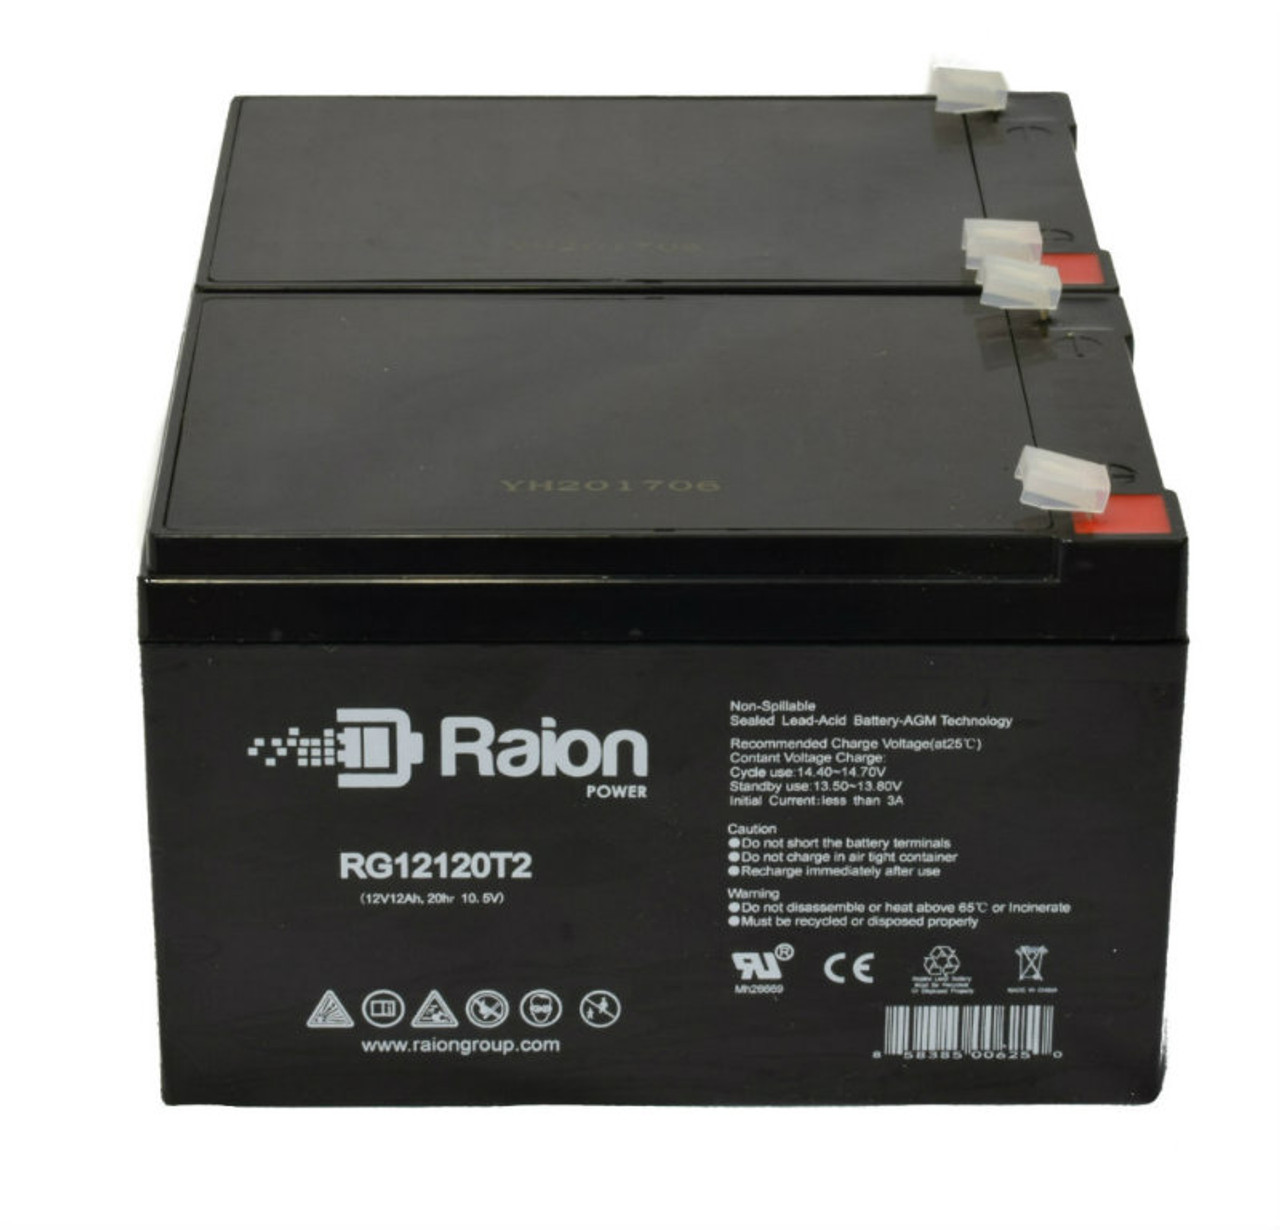 Raion Power 12V 12Ah Non-Spillable Compatible Replacement Battery for Henglypower HL12100 - (2 Pack)